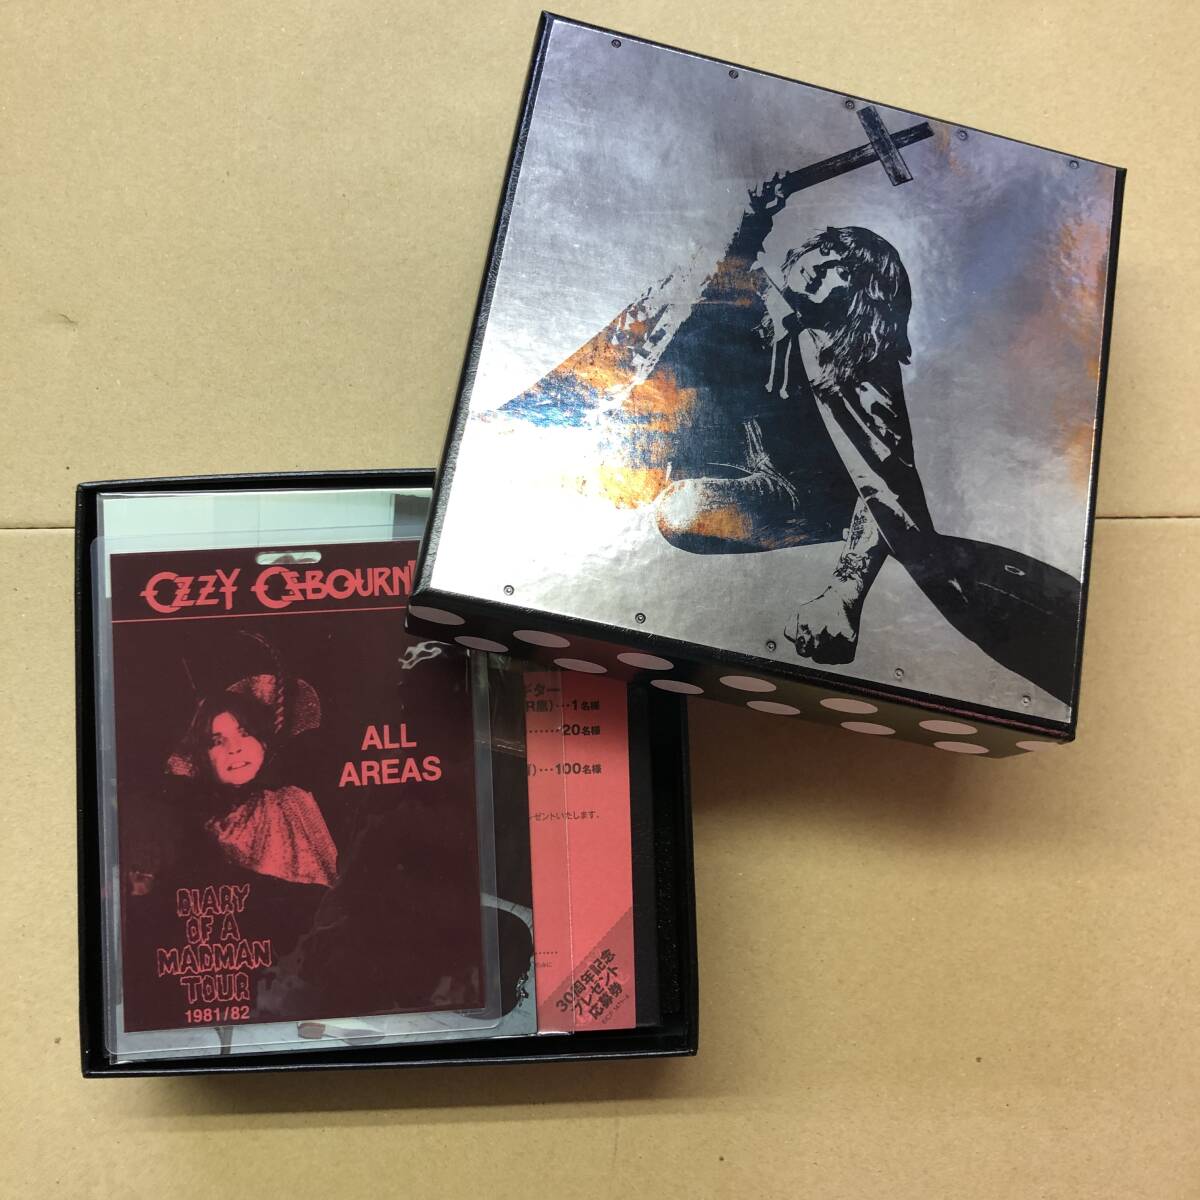 #Ozzy Osbourne Blizzard Of Ozz / Diary Of A Madman - 30th Anniversary Collectors Edition[3CD+DVD]4547366060676